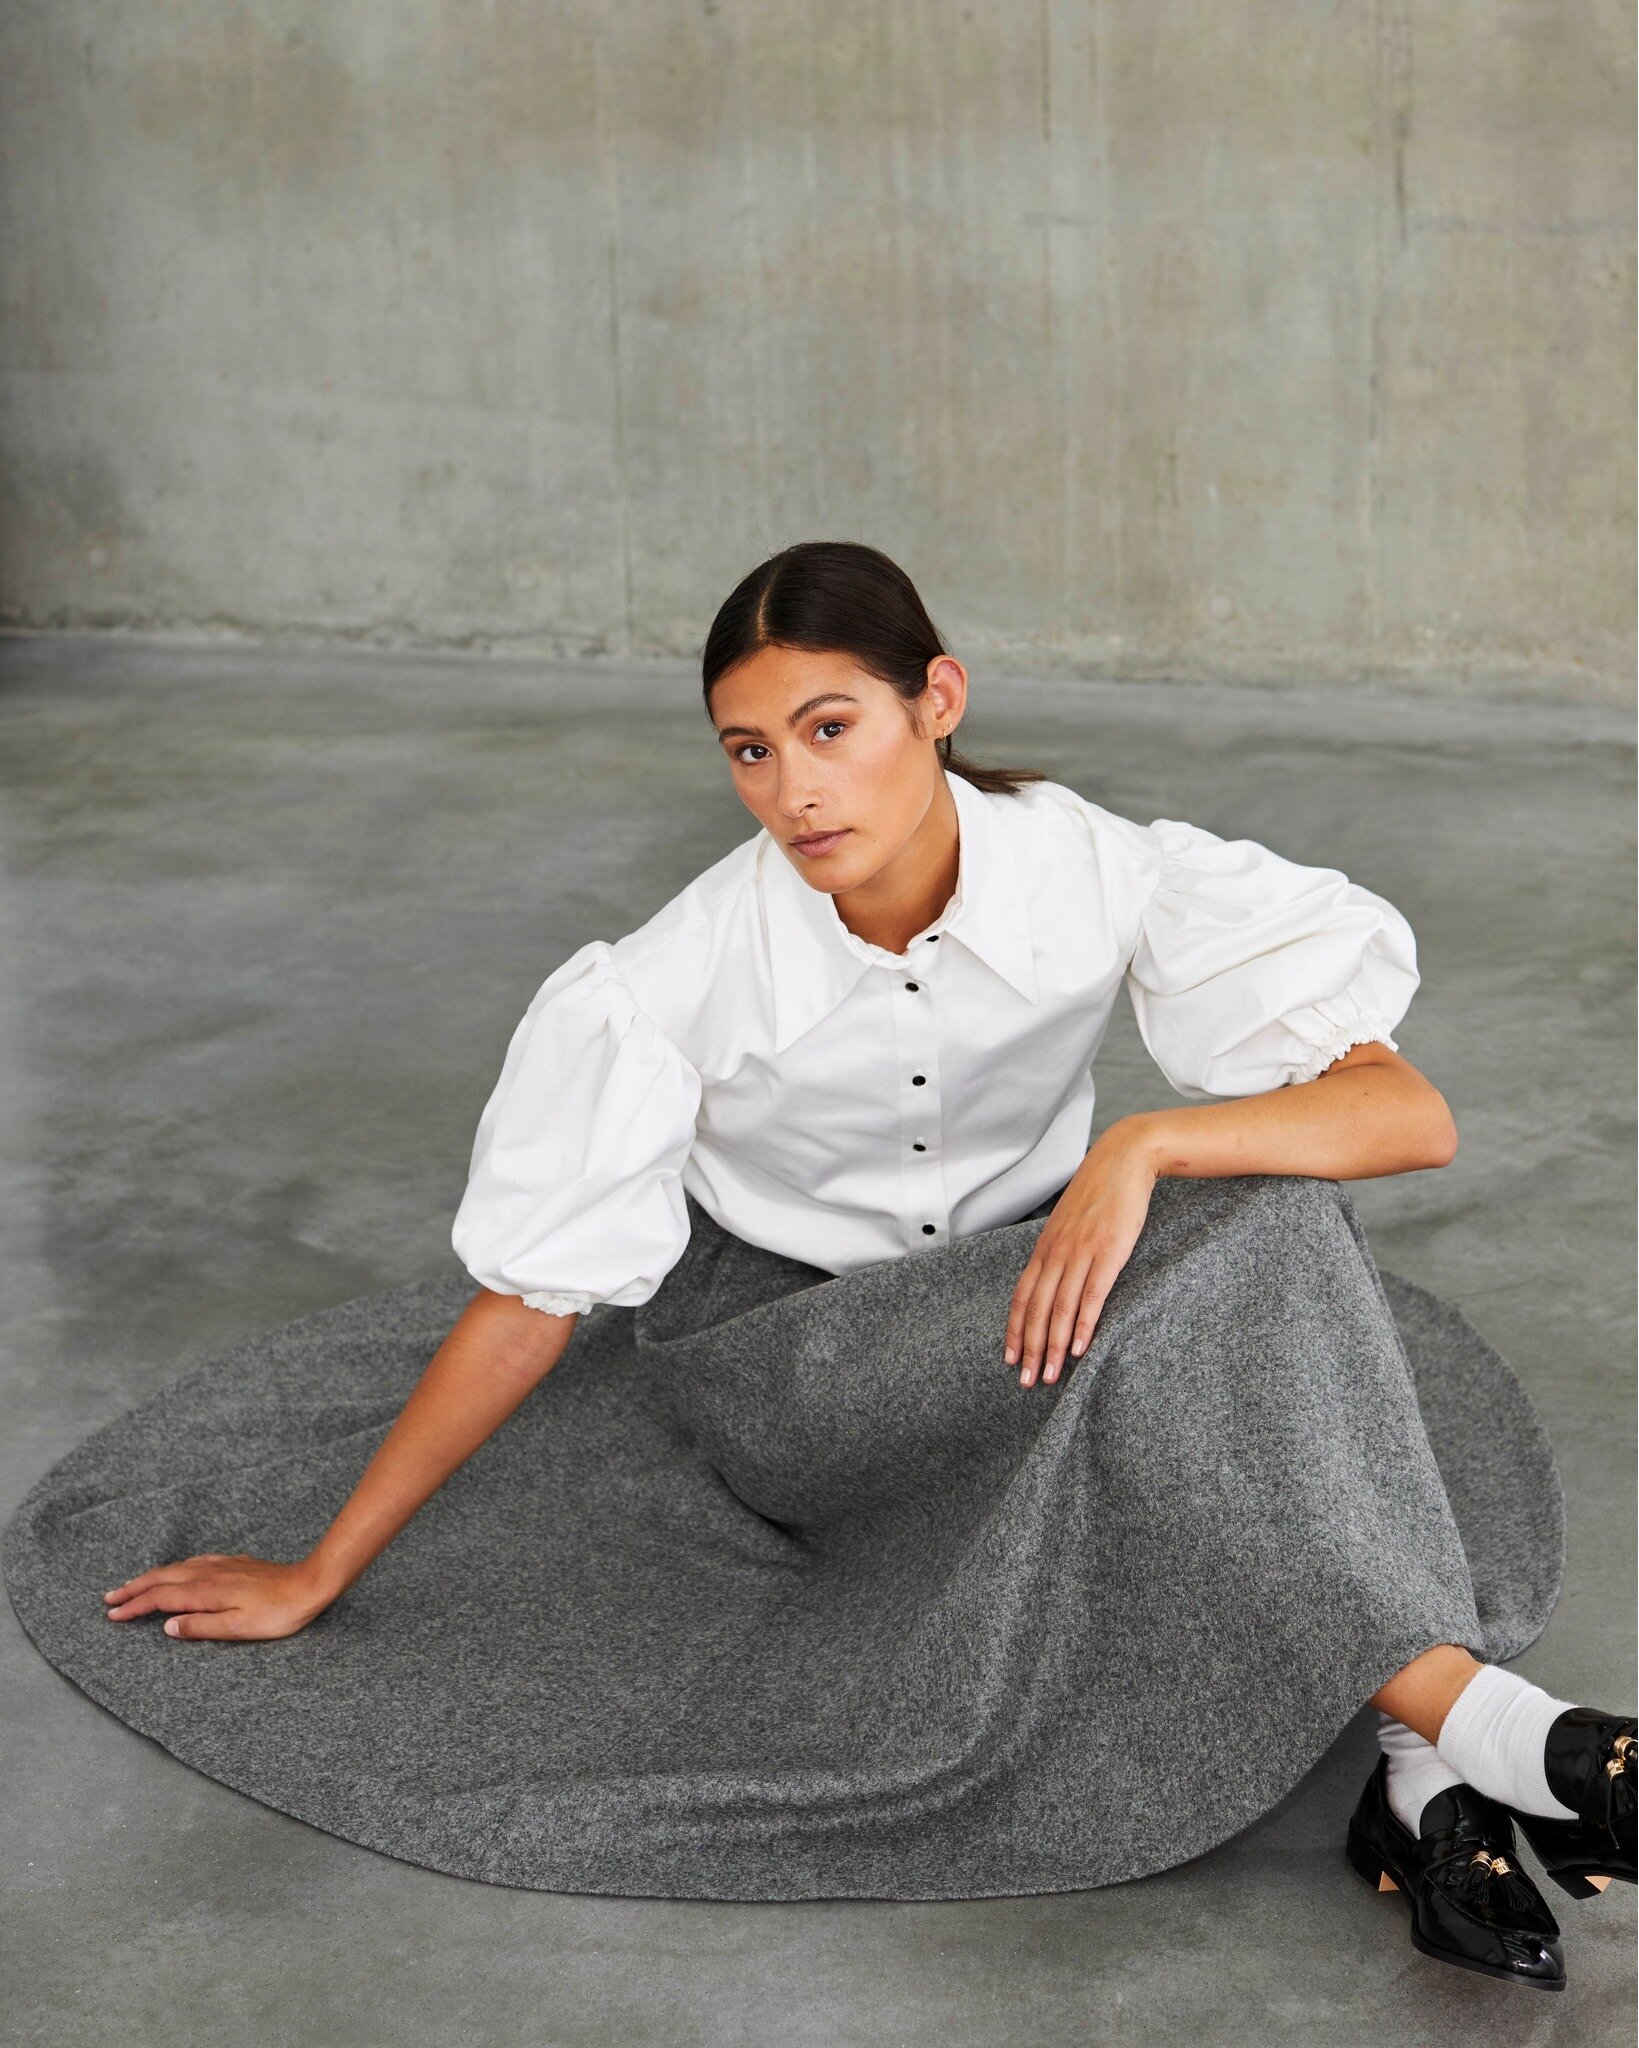 We&rsquo;re all about wardrobe staples, but know how important it is to find one in a shape and style that works for you.

Our Alexia shirt looks beyond gorgeous paired with the Constance skirt, but we know she&rsquo;d work just as well with whatever